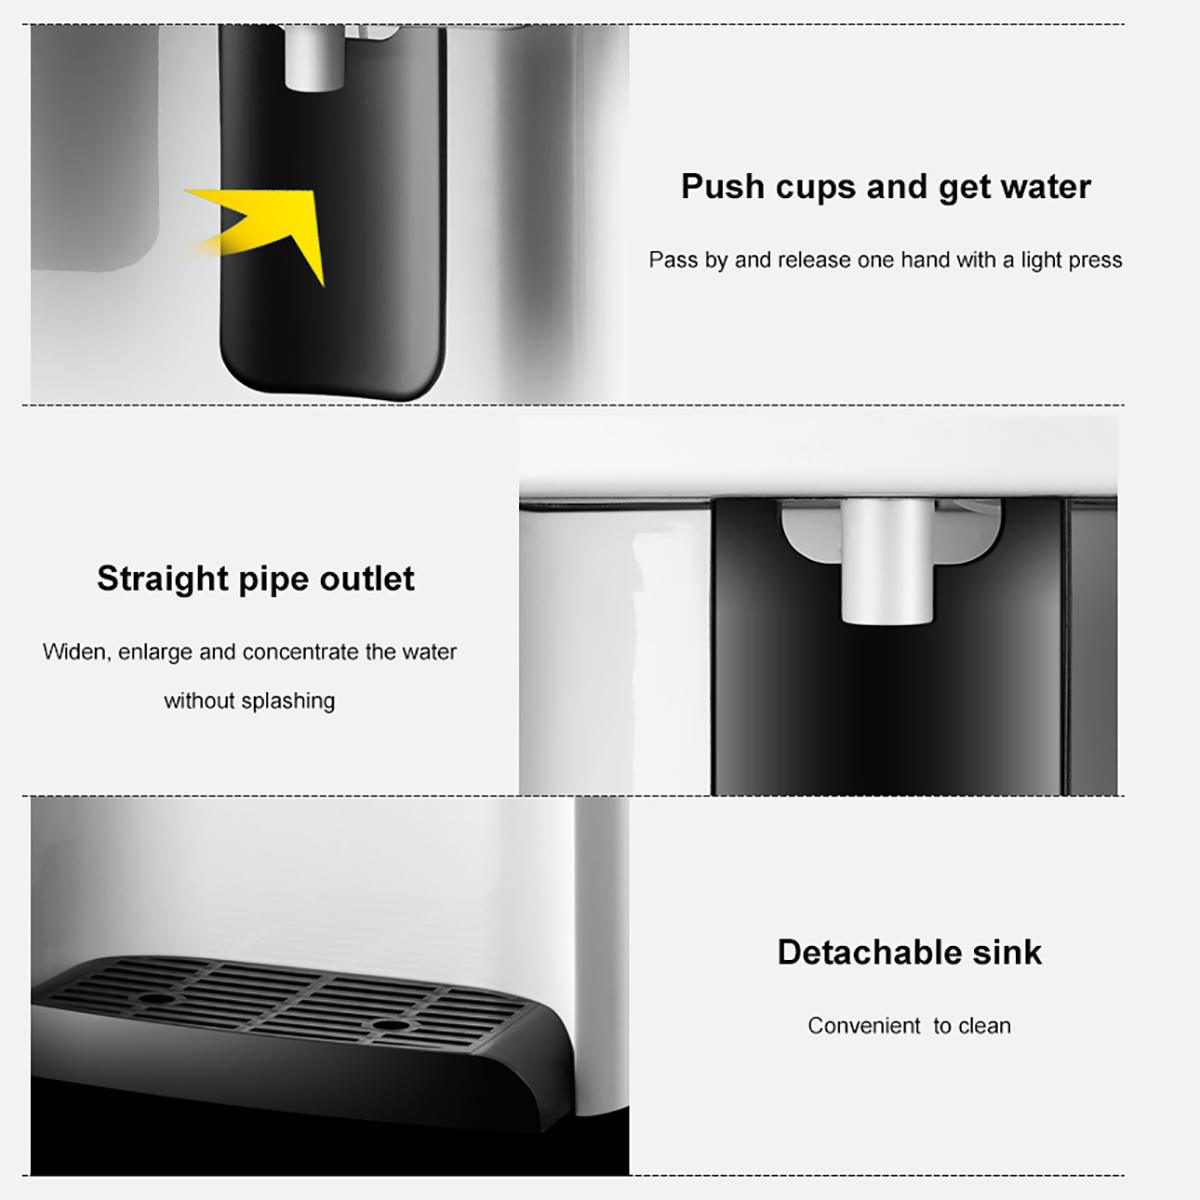 Desktop-Mini-WarmHotCold-Water-Dispenser-Pumping-Device-Pushing-Switch-Convenient-Getting-Water-Home-1611038